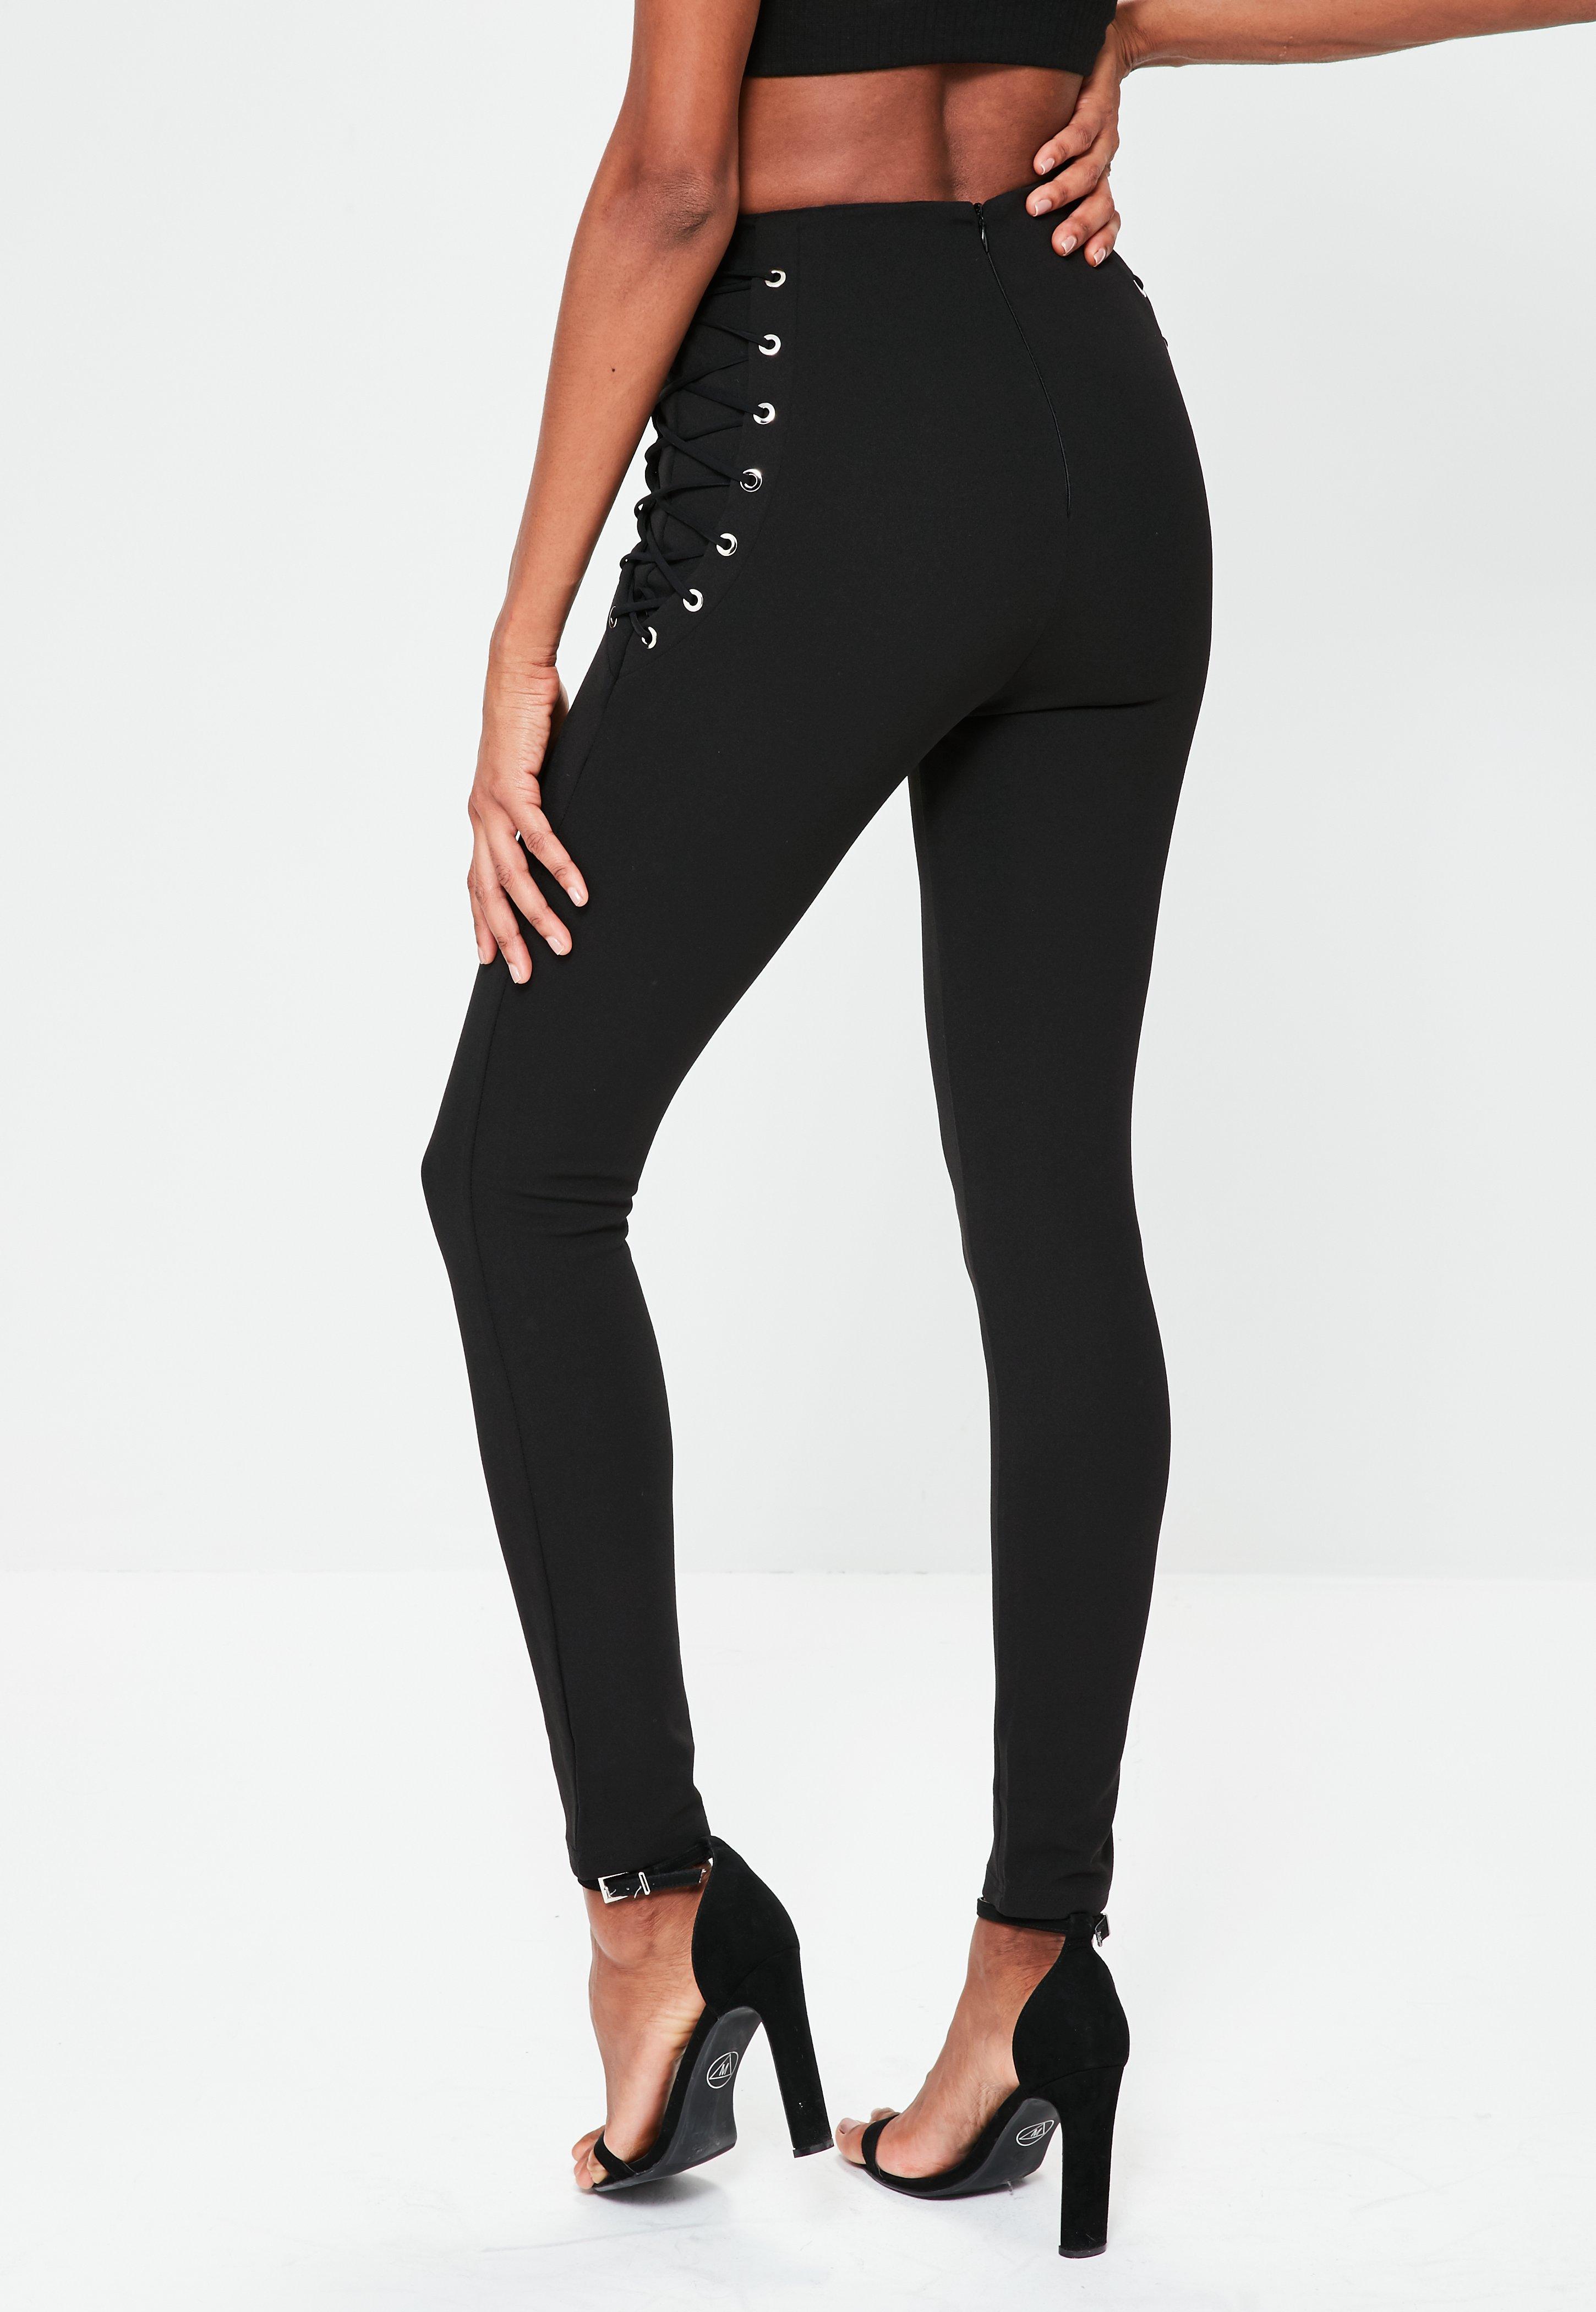 Missguided Black Lace Up Side Skinny Trousers - Lyst